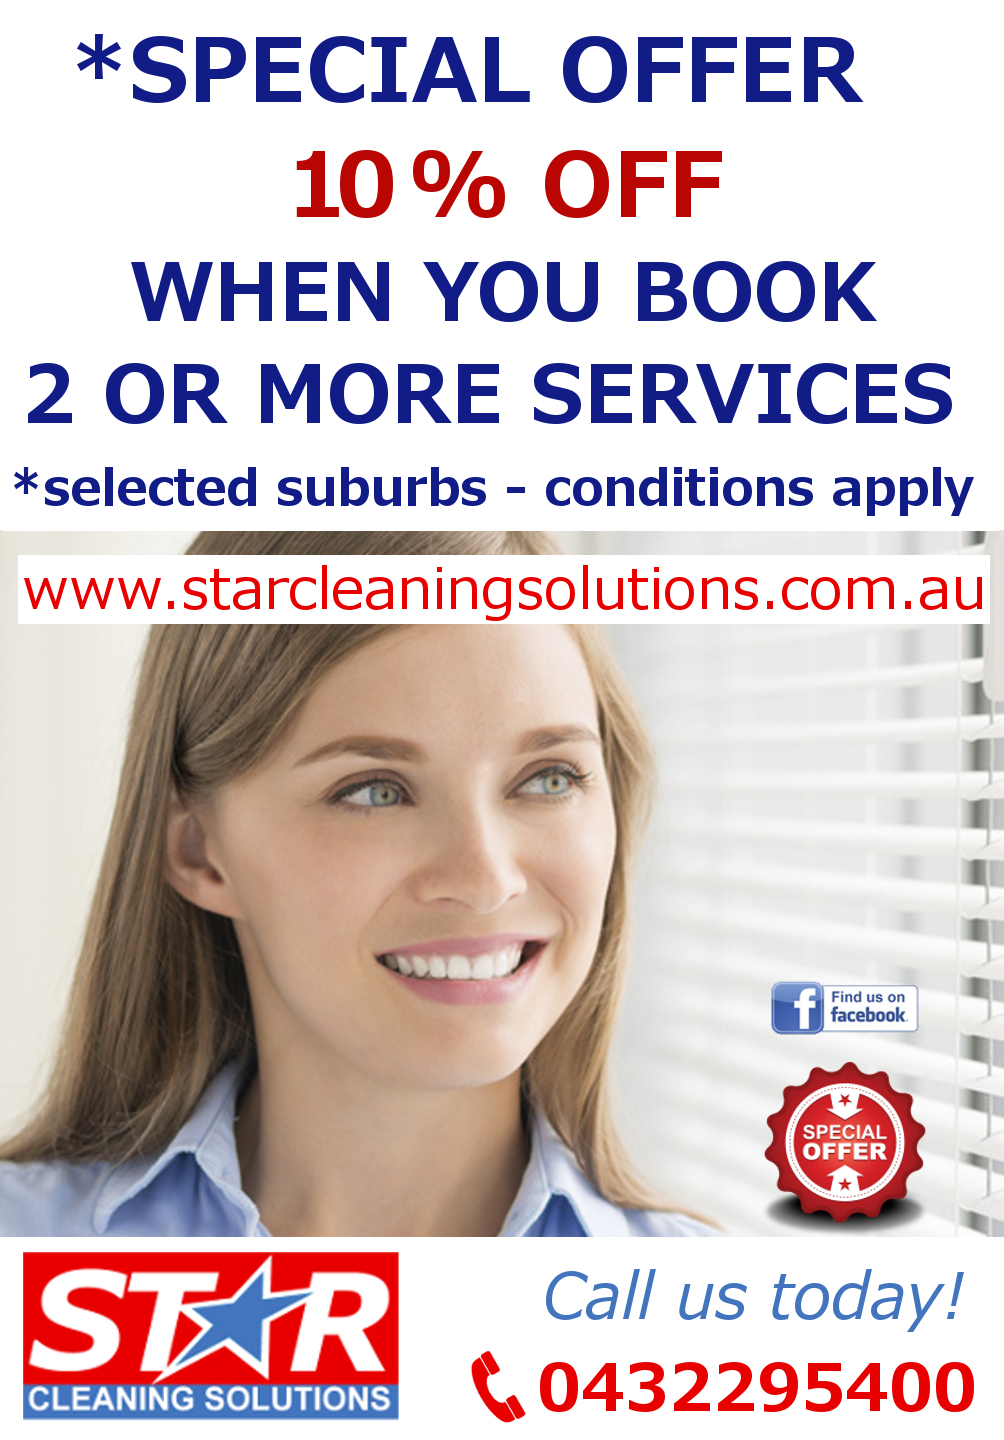 Blinds and Carpet Cleaning Offer. Call 0432295400